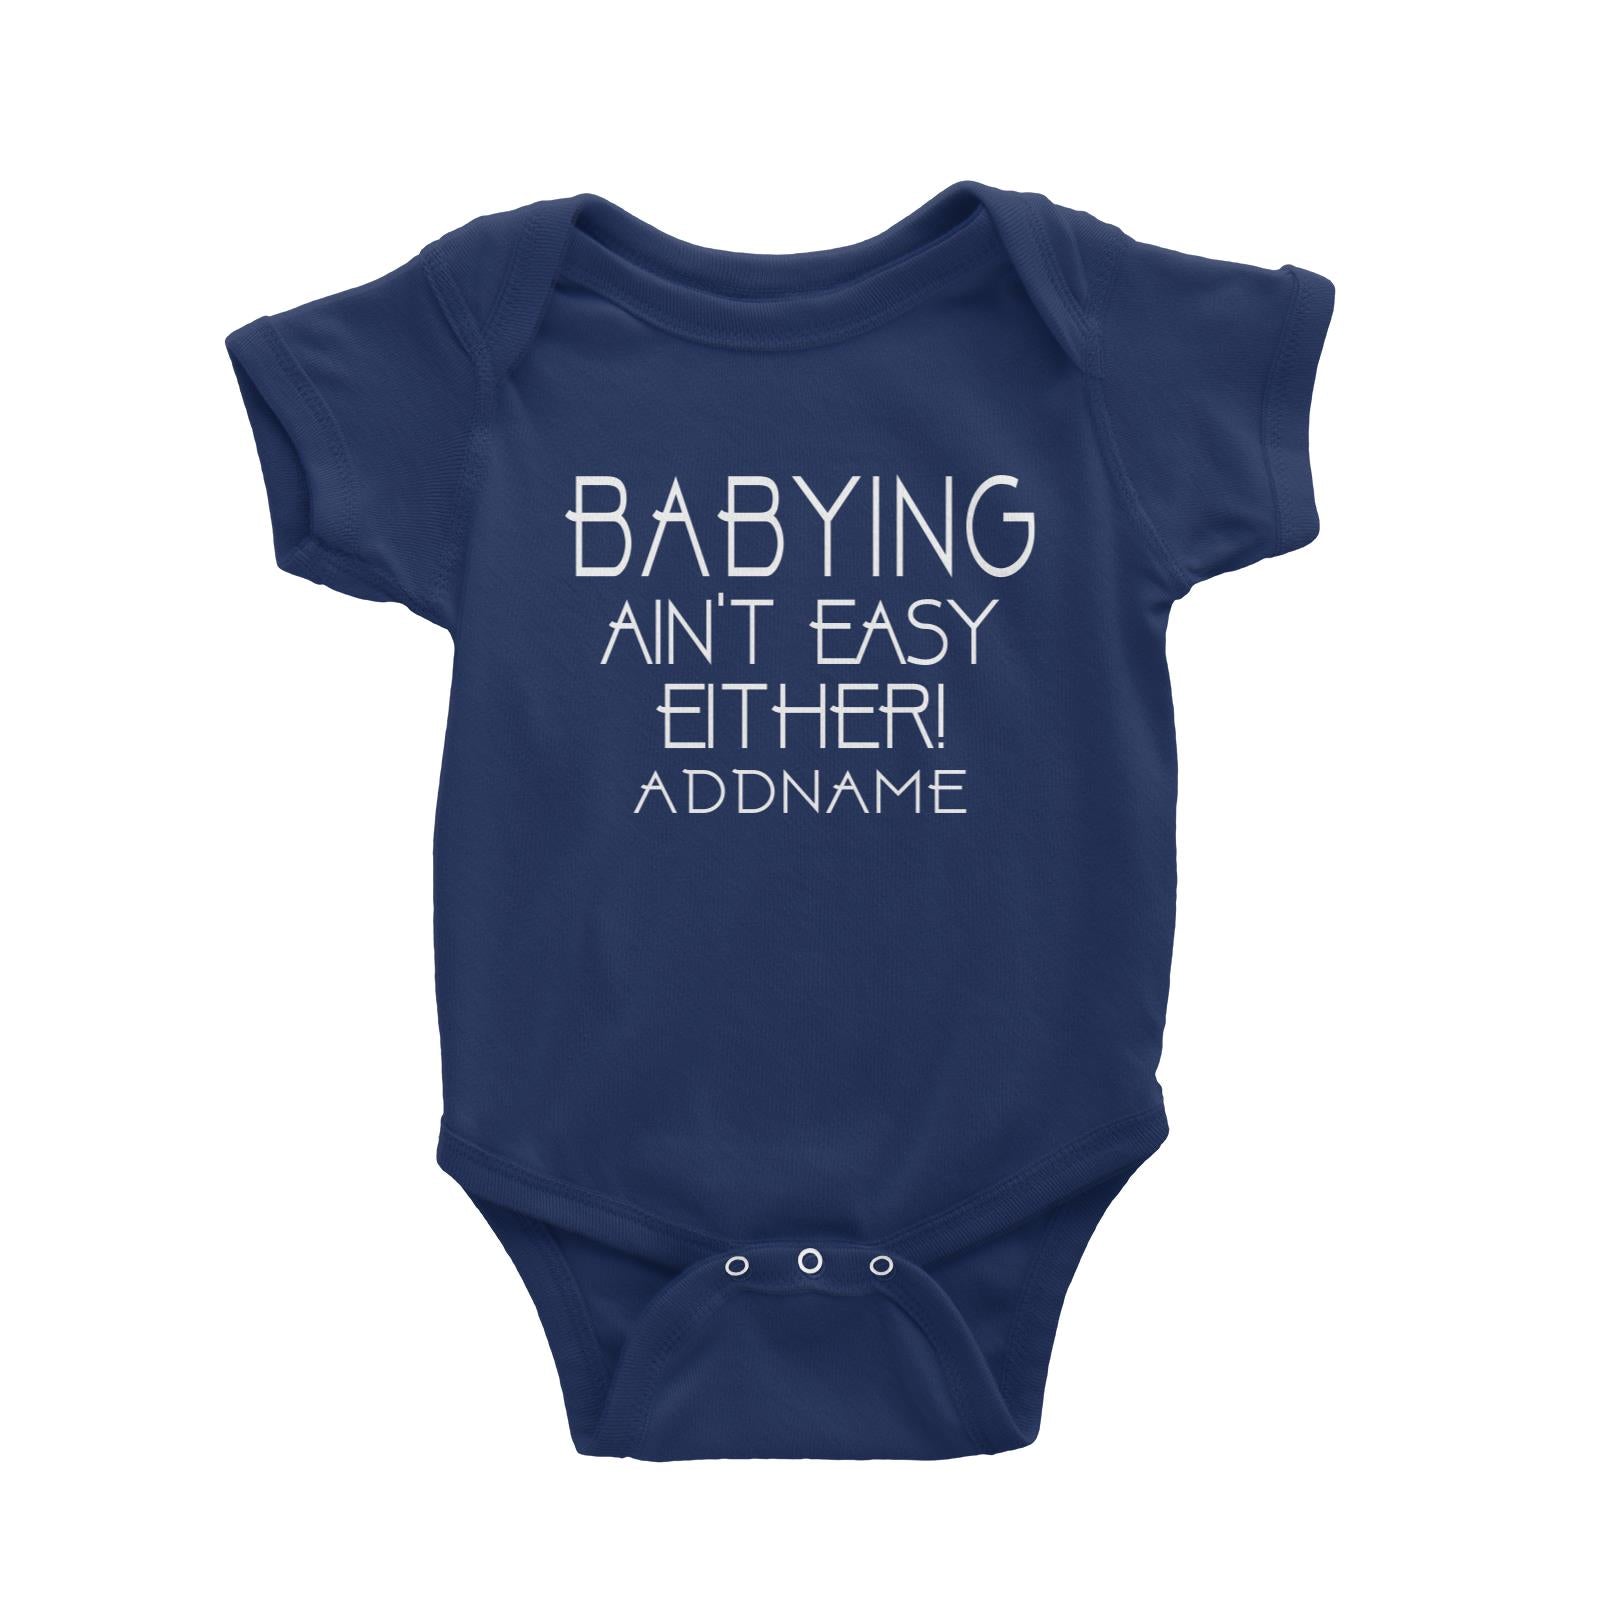 Babying Aint Easy Either Baby Romper